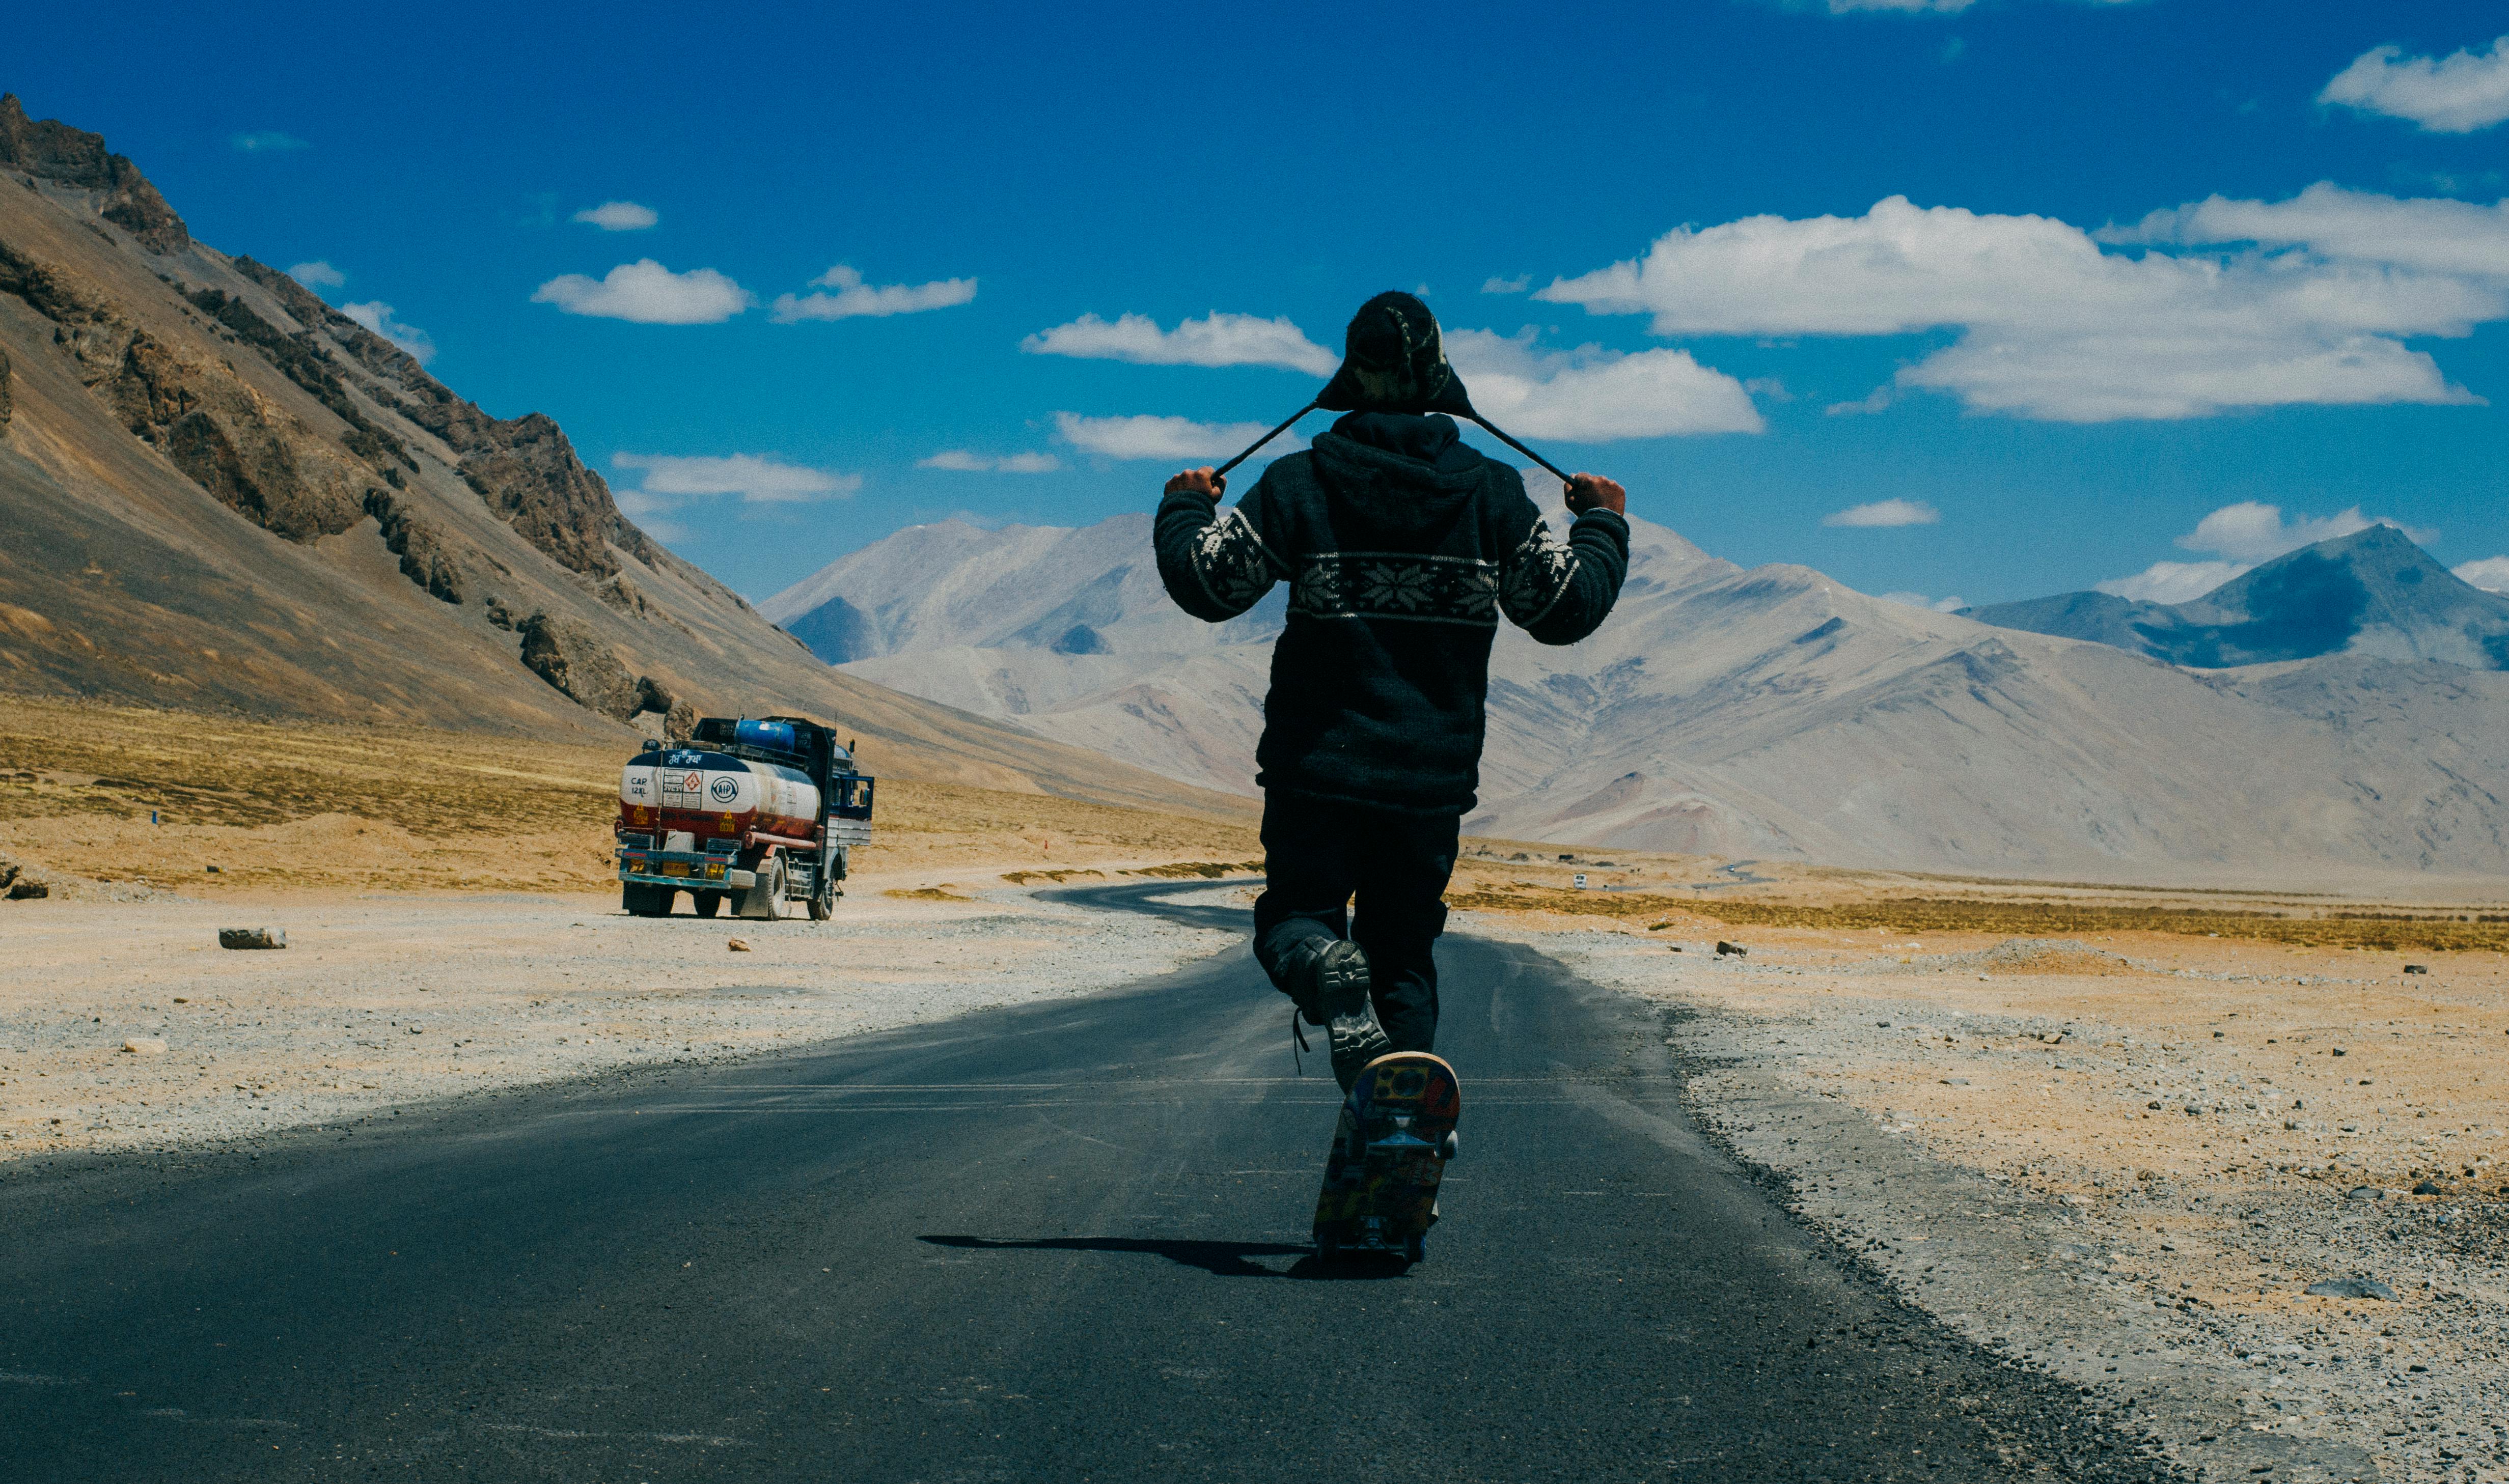 Ladakh Photo by Abhishek Gaurav from Pexels: https://www.pexels.com/photo/person-walking-while-holding-his-hat-strap-1305603/